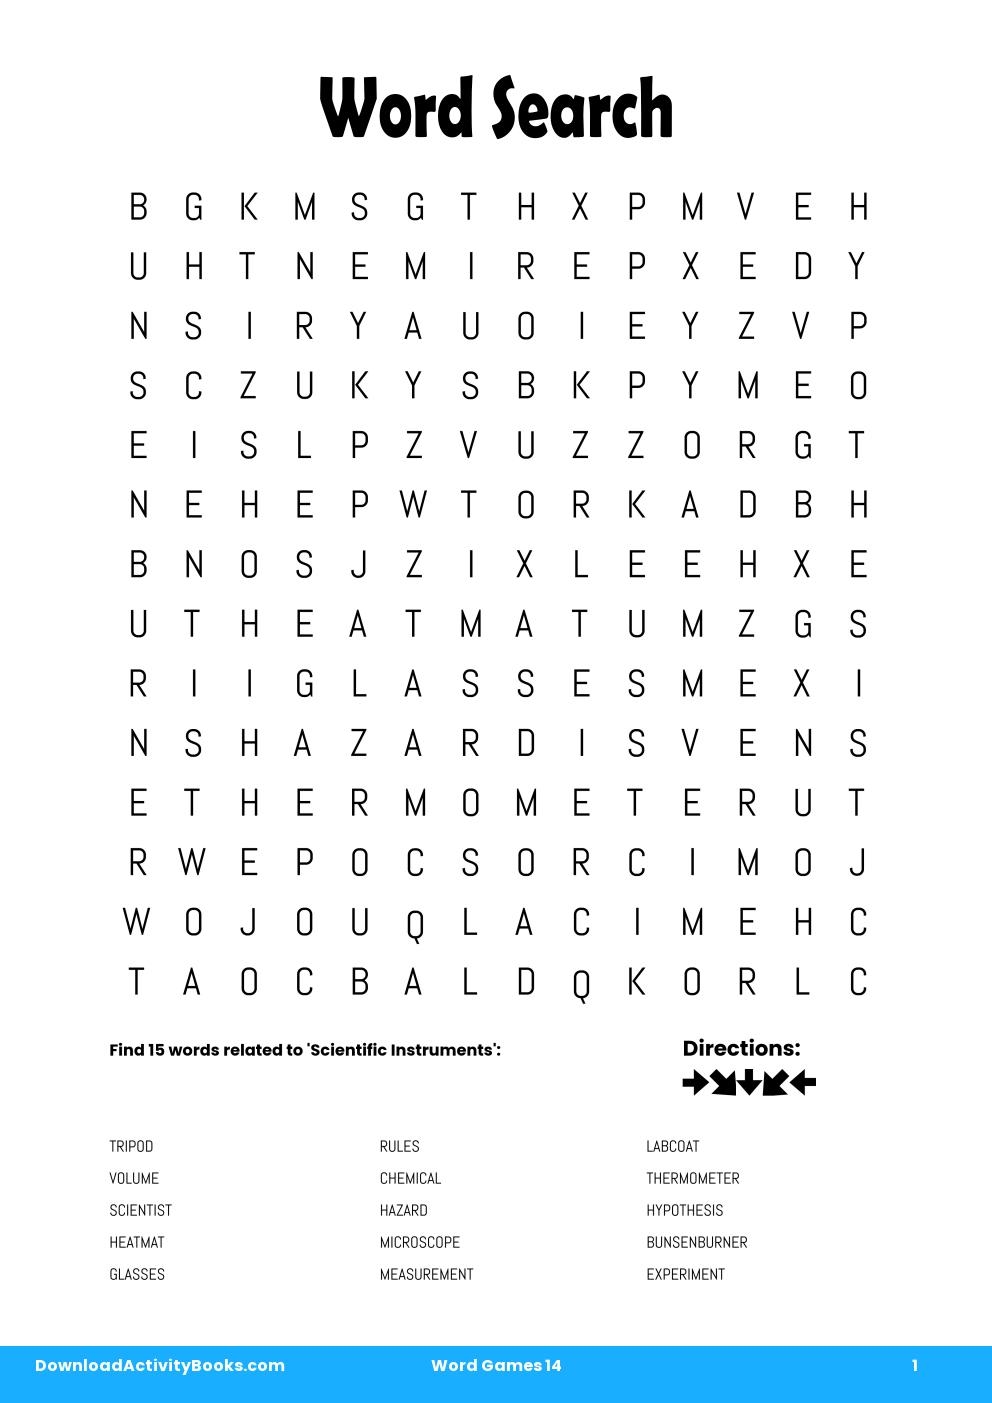 Word Search in Word Games 14